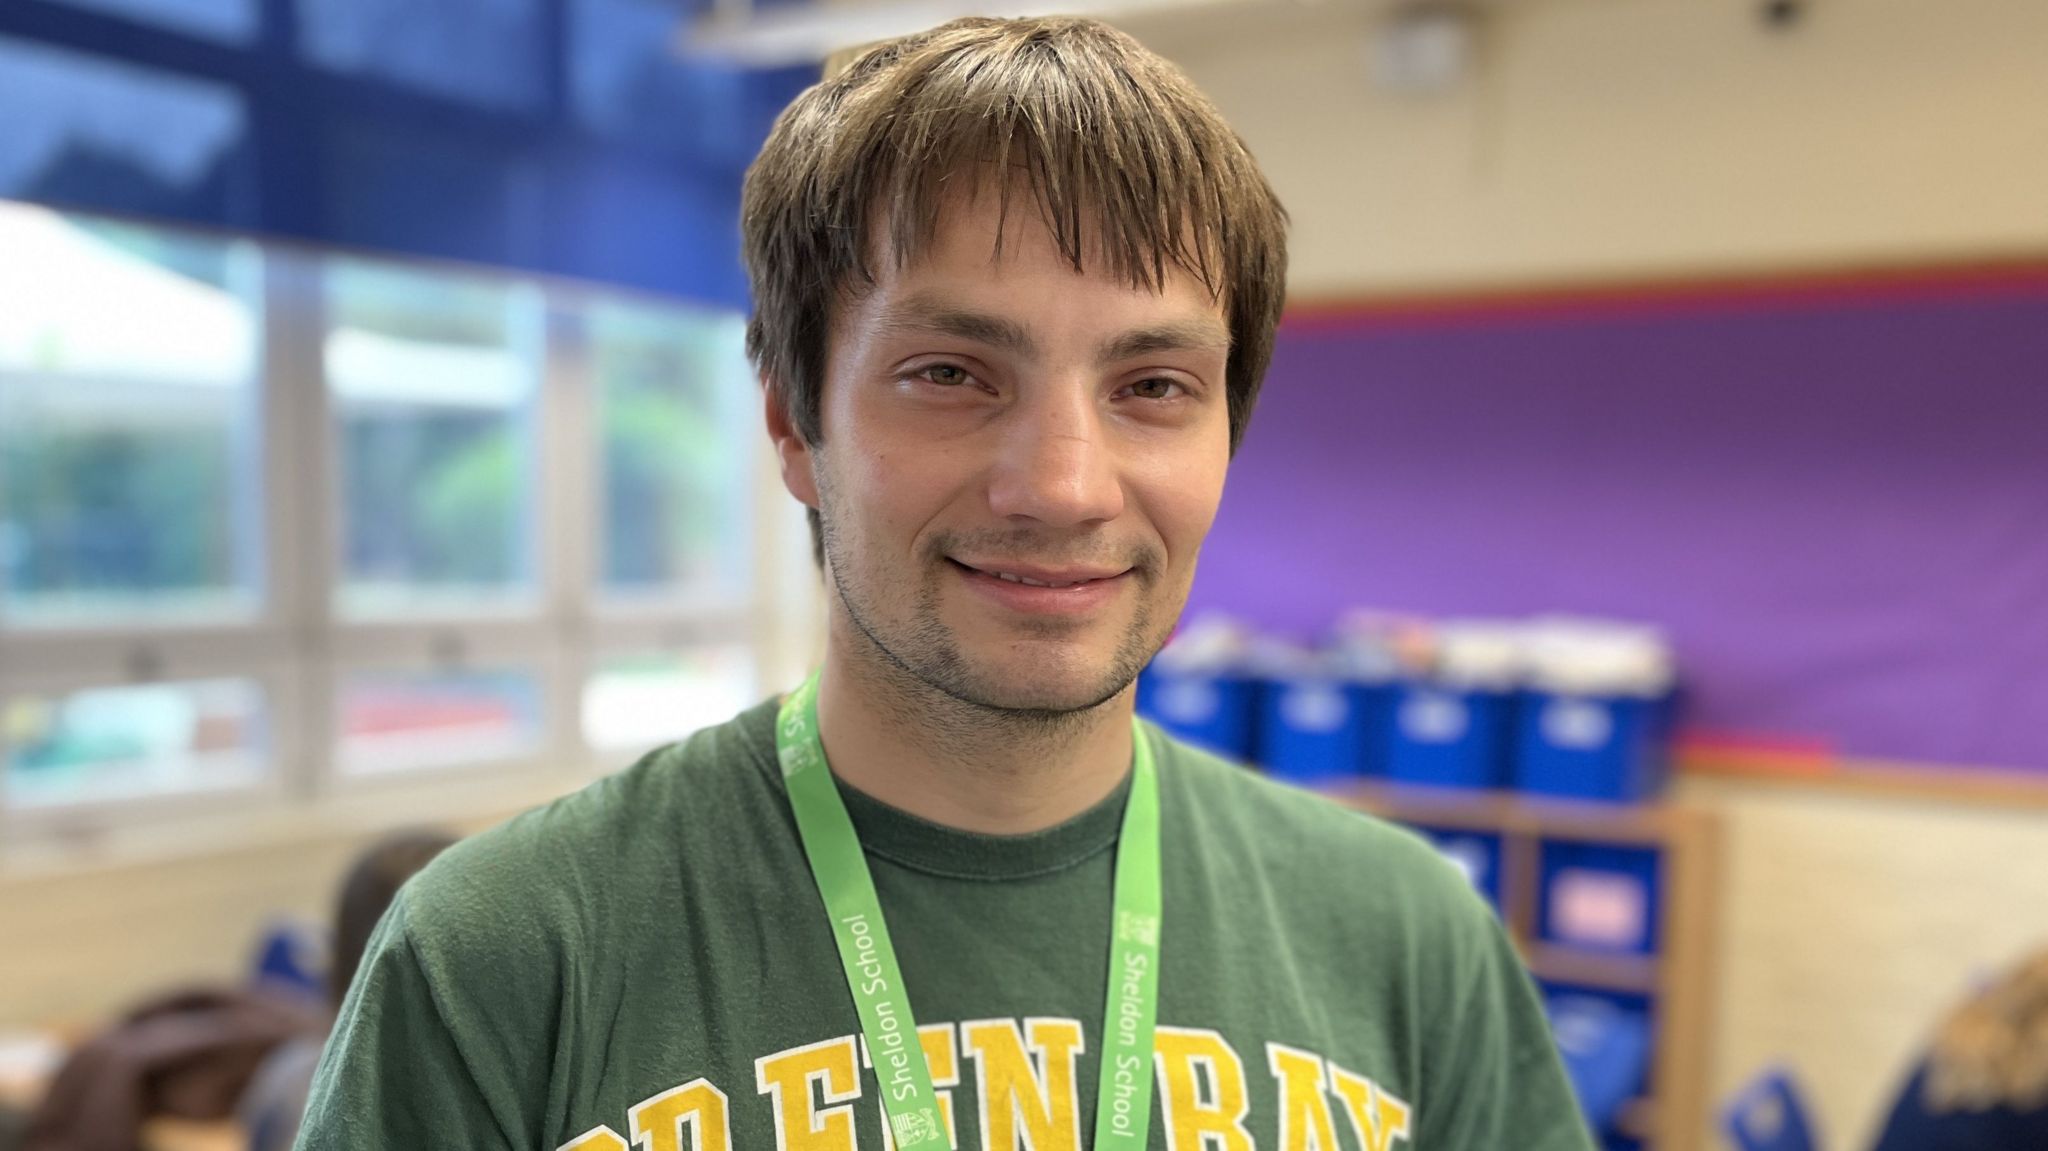 Former student, Kieran Pidgeon, smiling with short brown hair wearing a green t-shirt